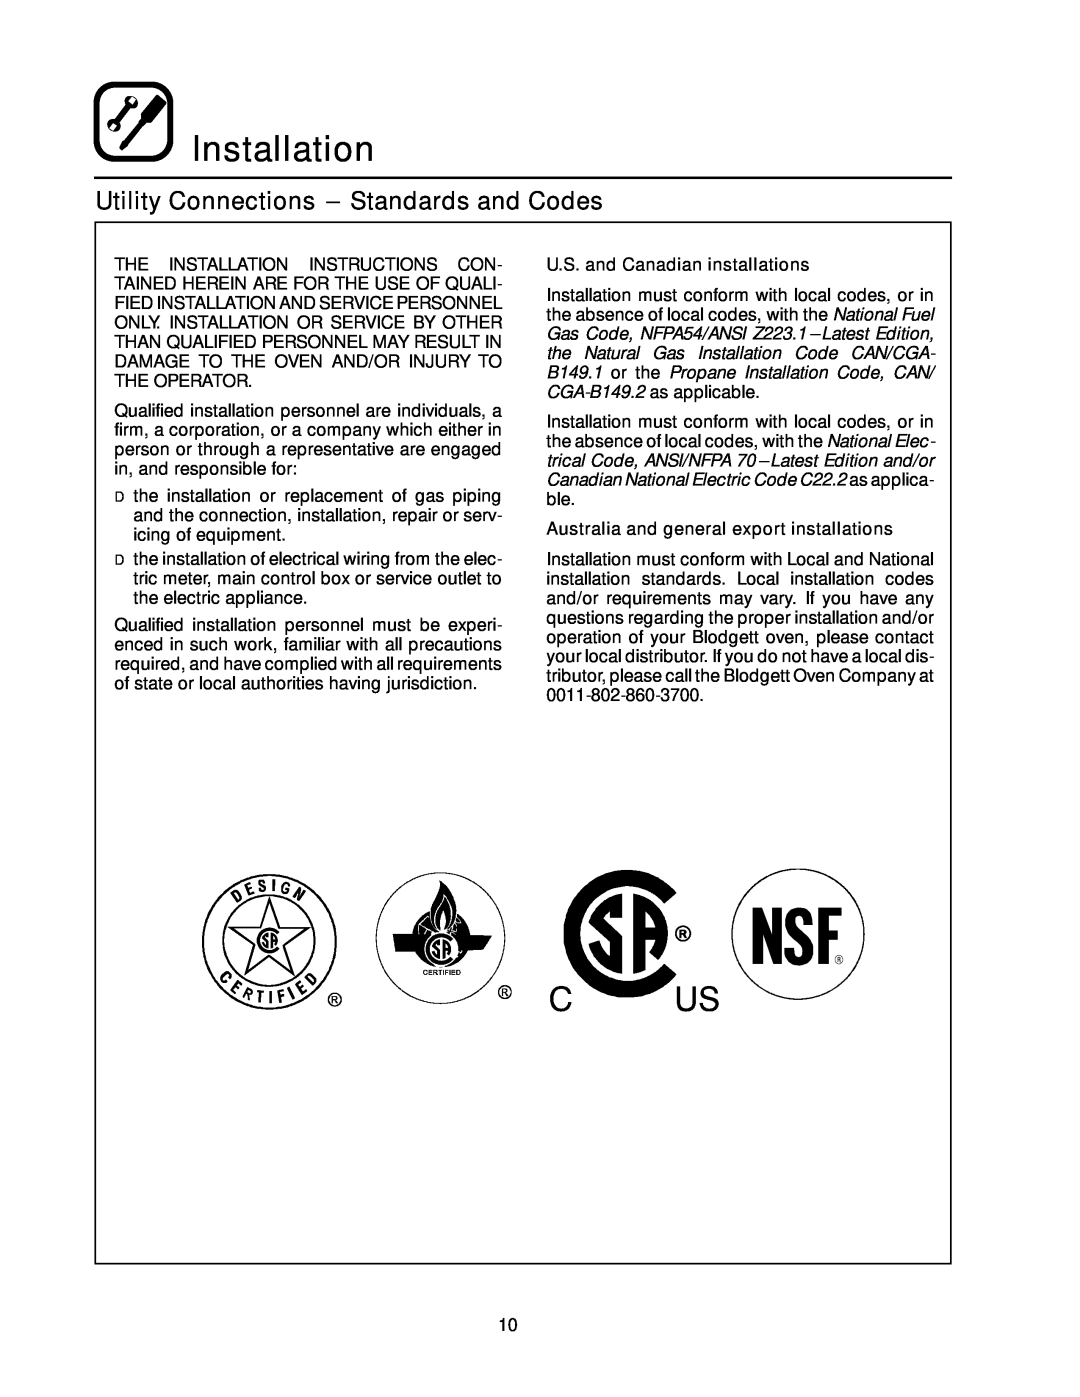 Blodgett RE Series manual Utility Connections --- Standards and Codes, Installation, U.S. and Canadian installations 